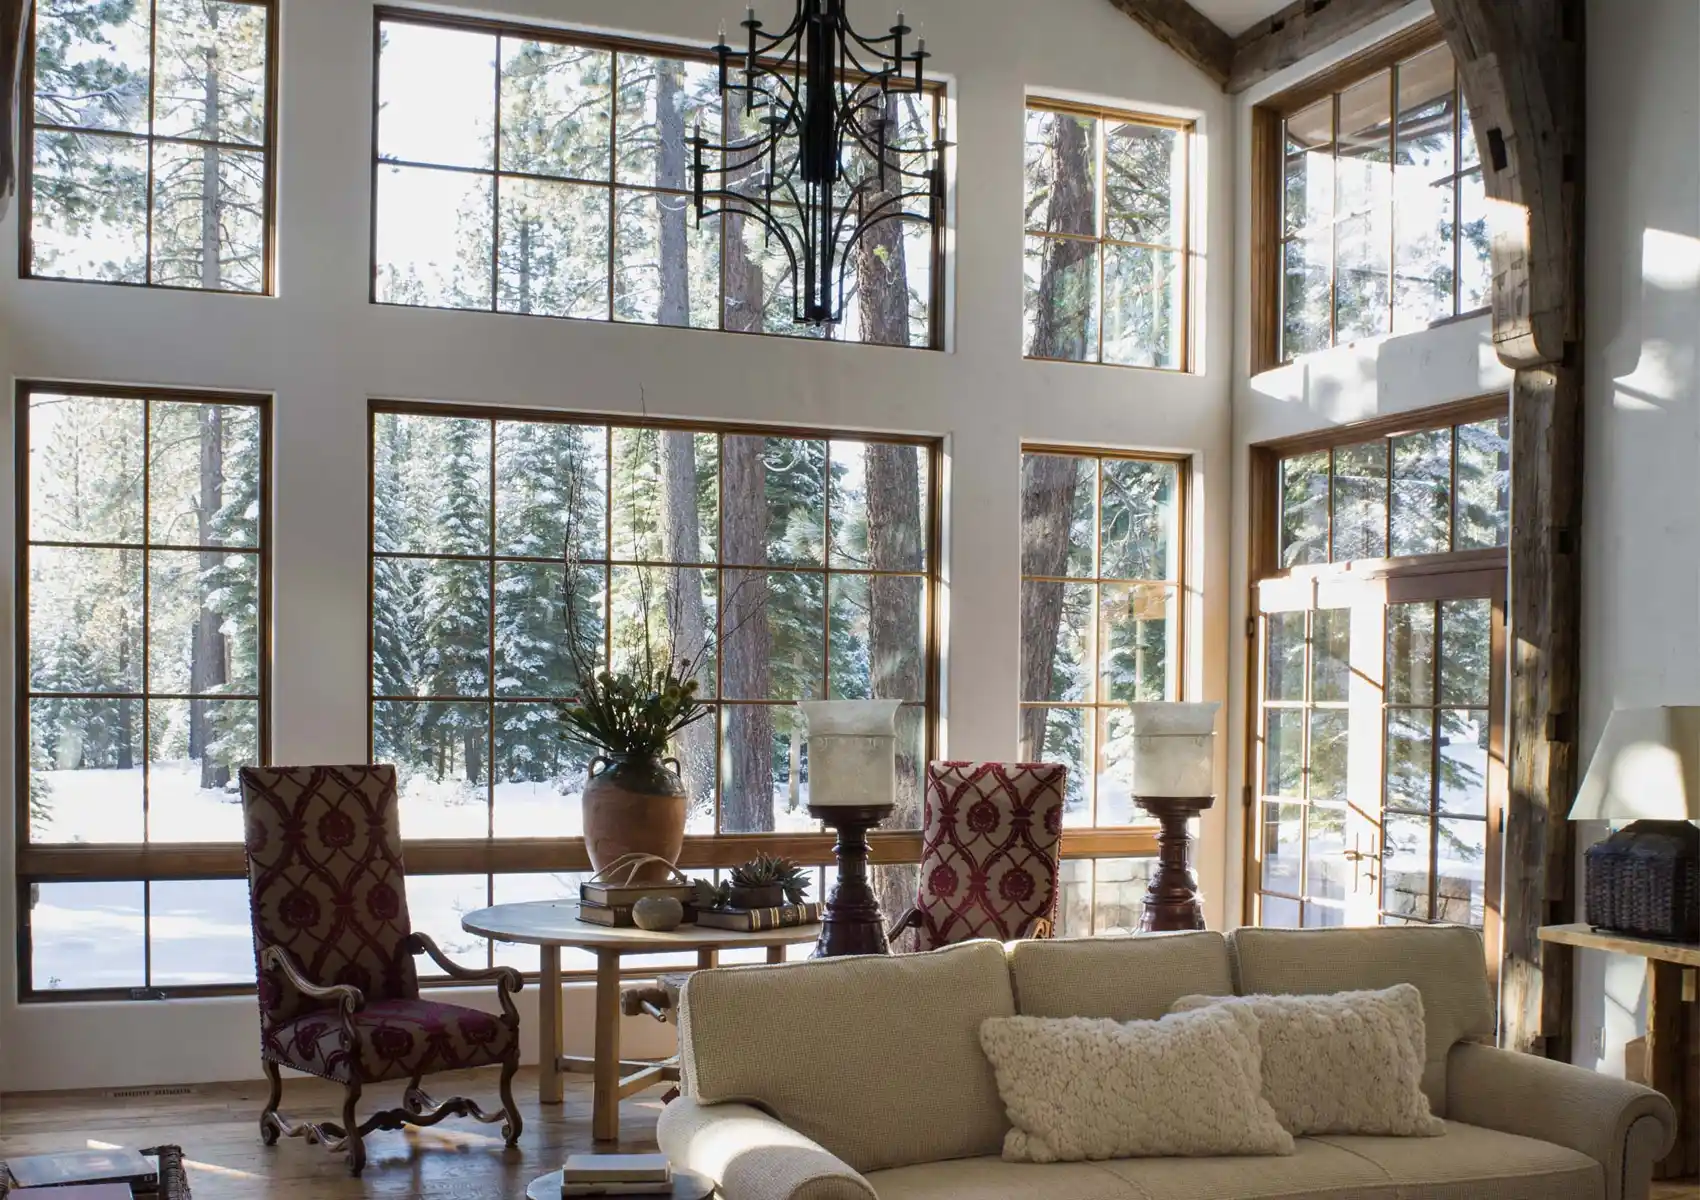 Upper Freehold integrated sunroom, vaulted ceilings, rustic wood beams, natural light